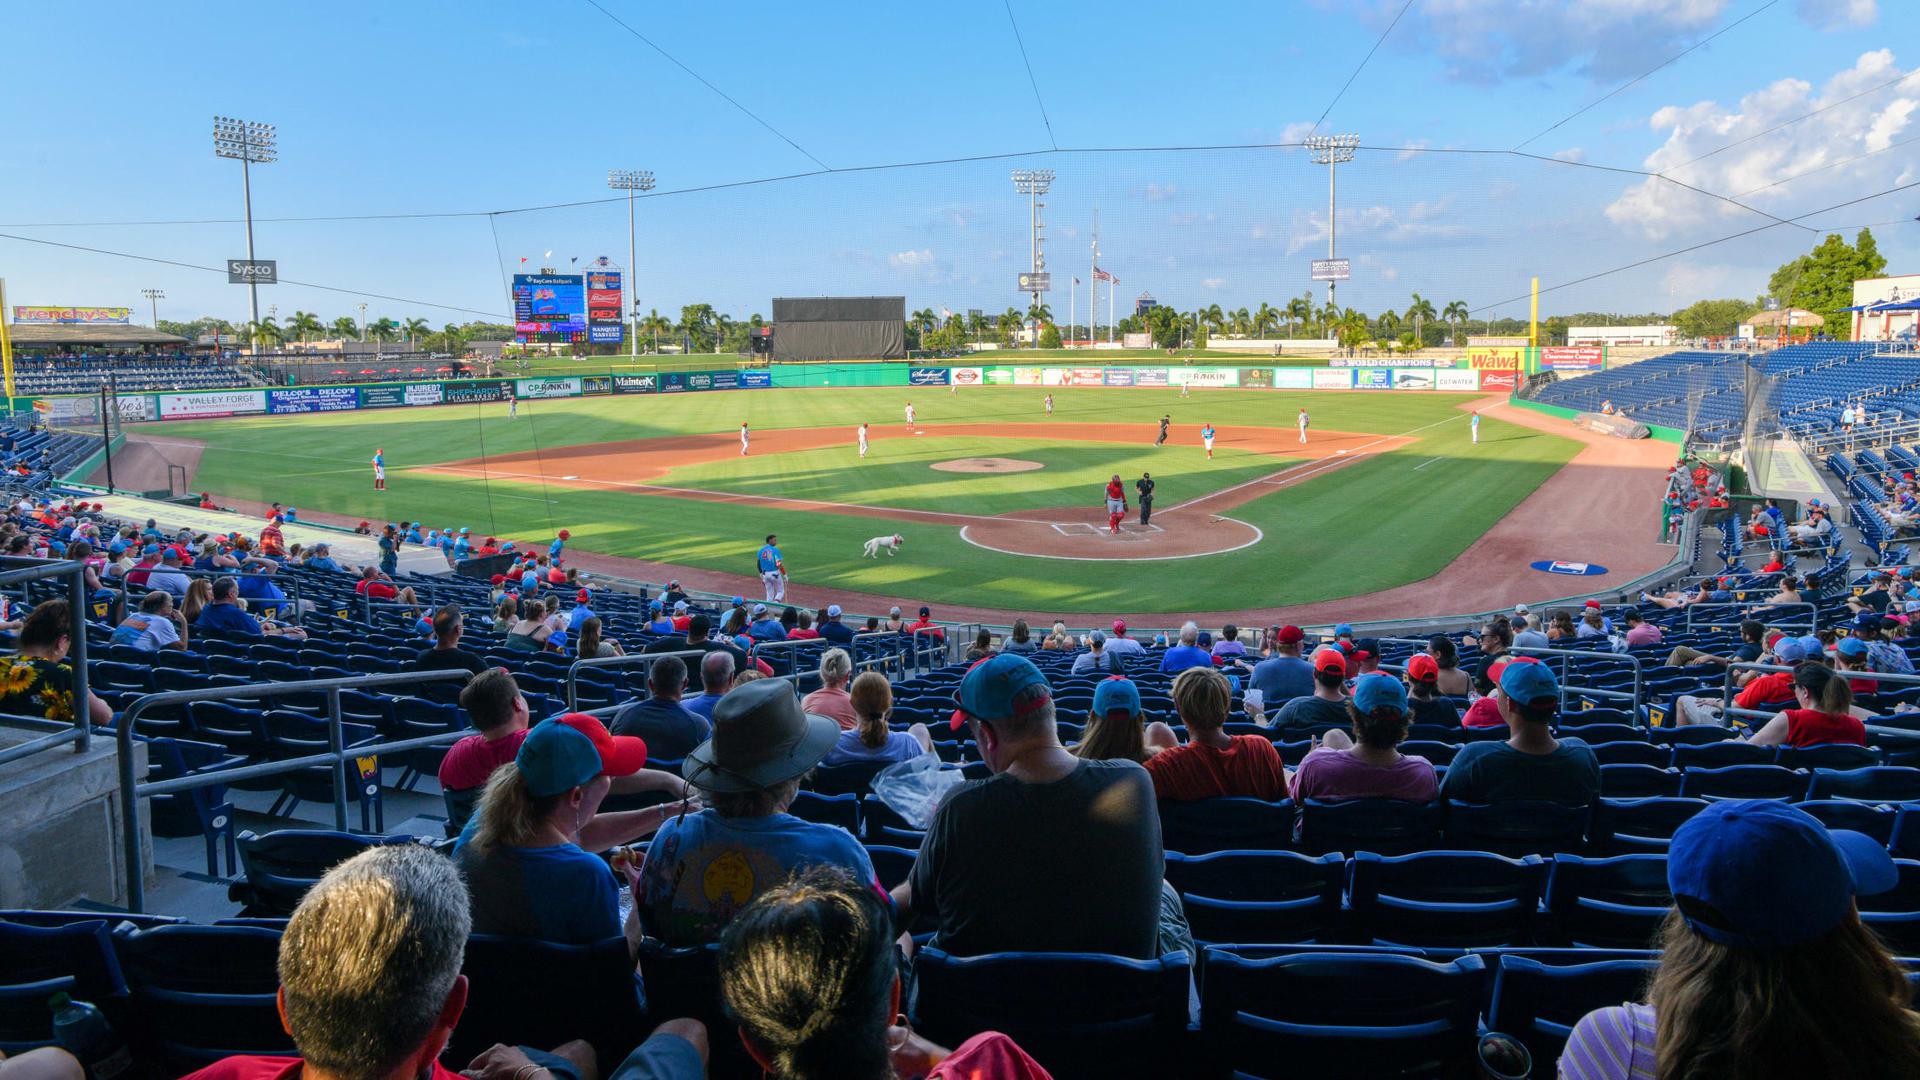 Baycare Ballpark, home of the Clearwater Threshers